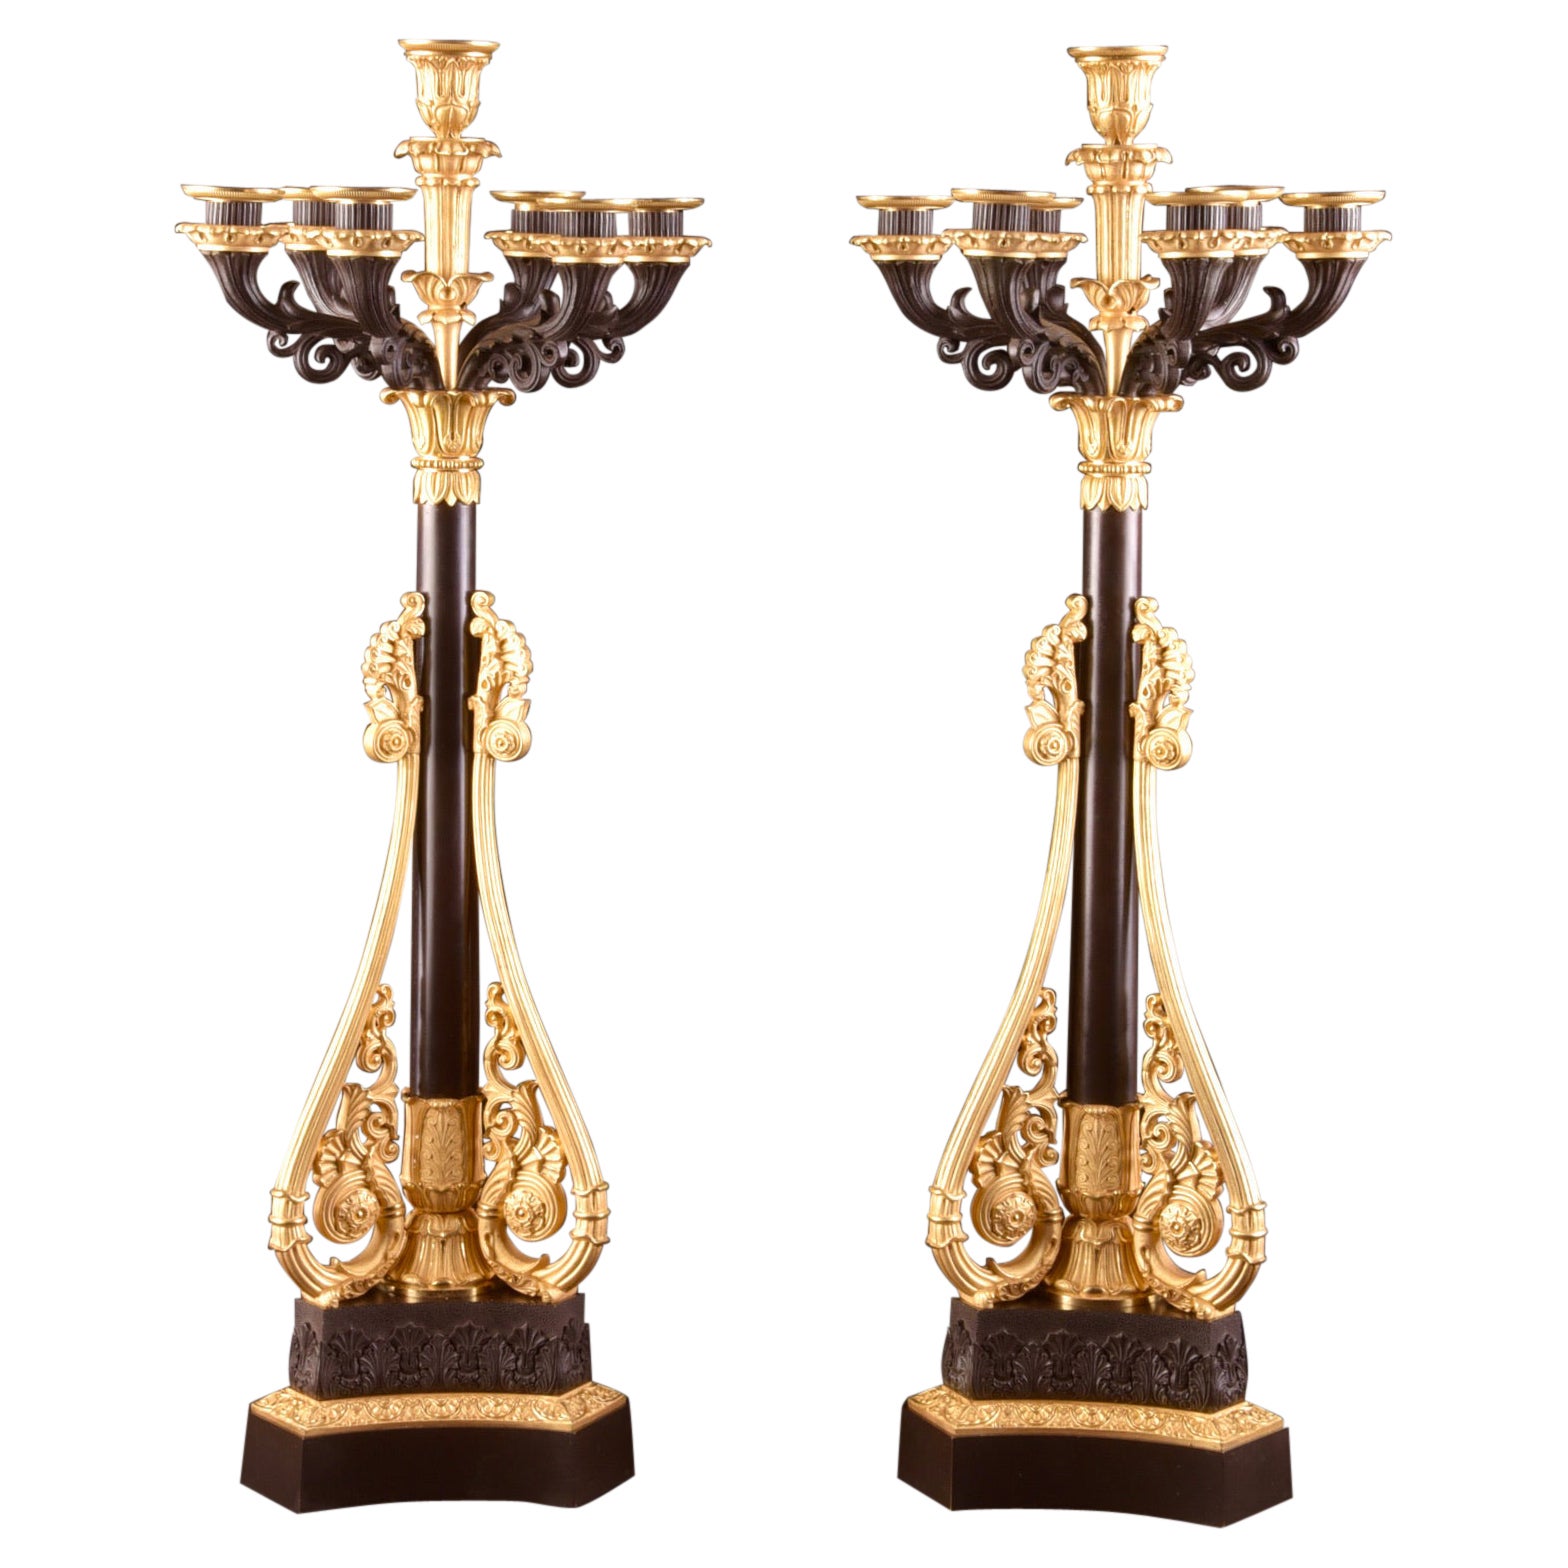 Attributed to Claude Galle Fabric, a Large Pair of Candelabra